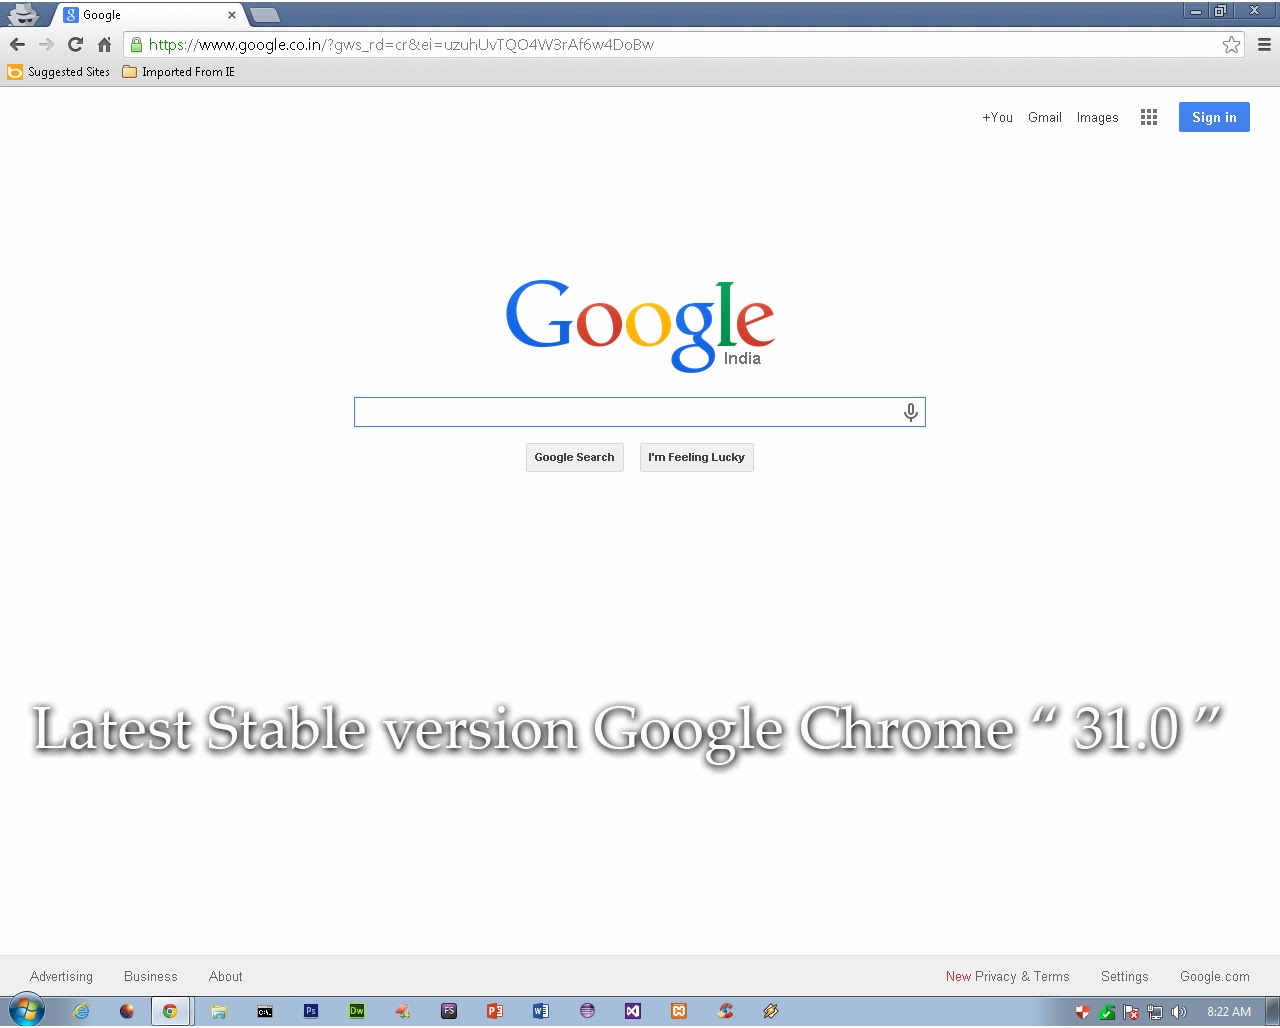 Download old version of google chrome for mac 10.5.8